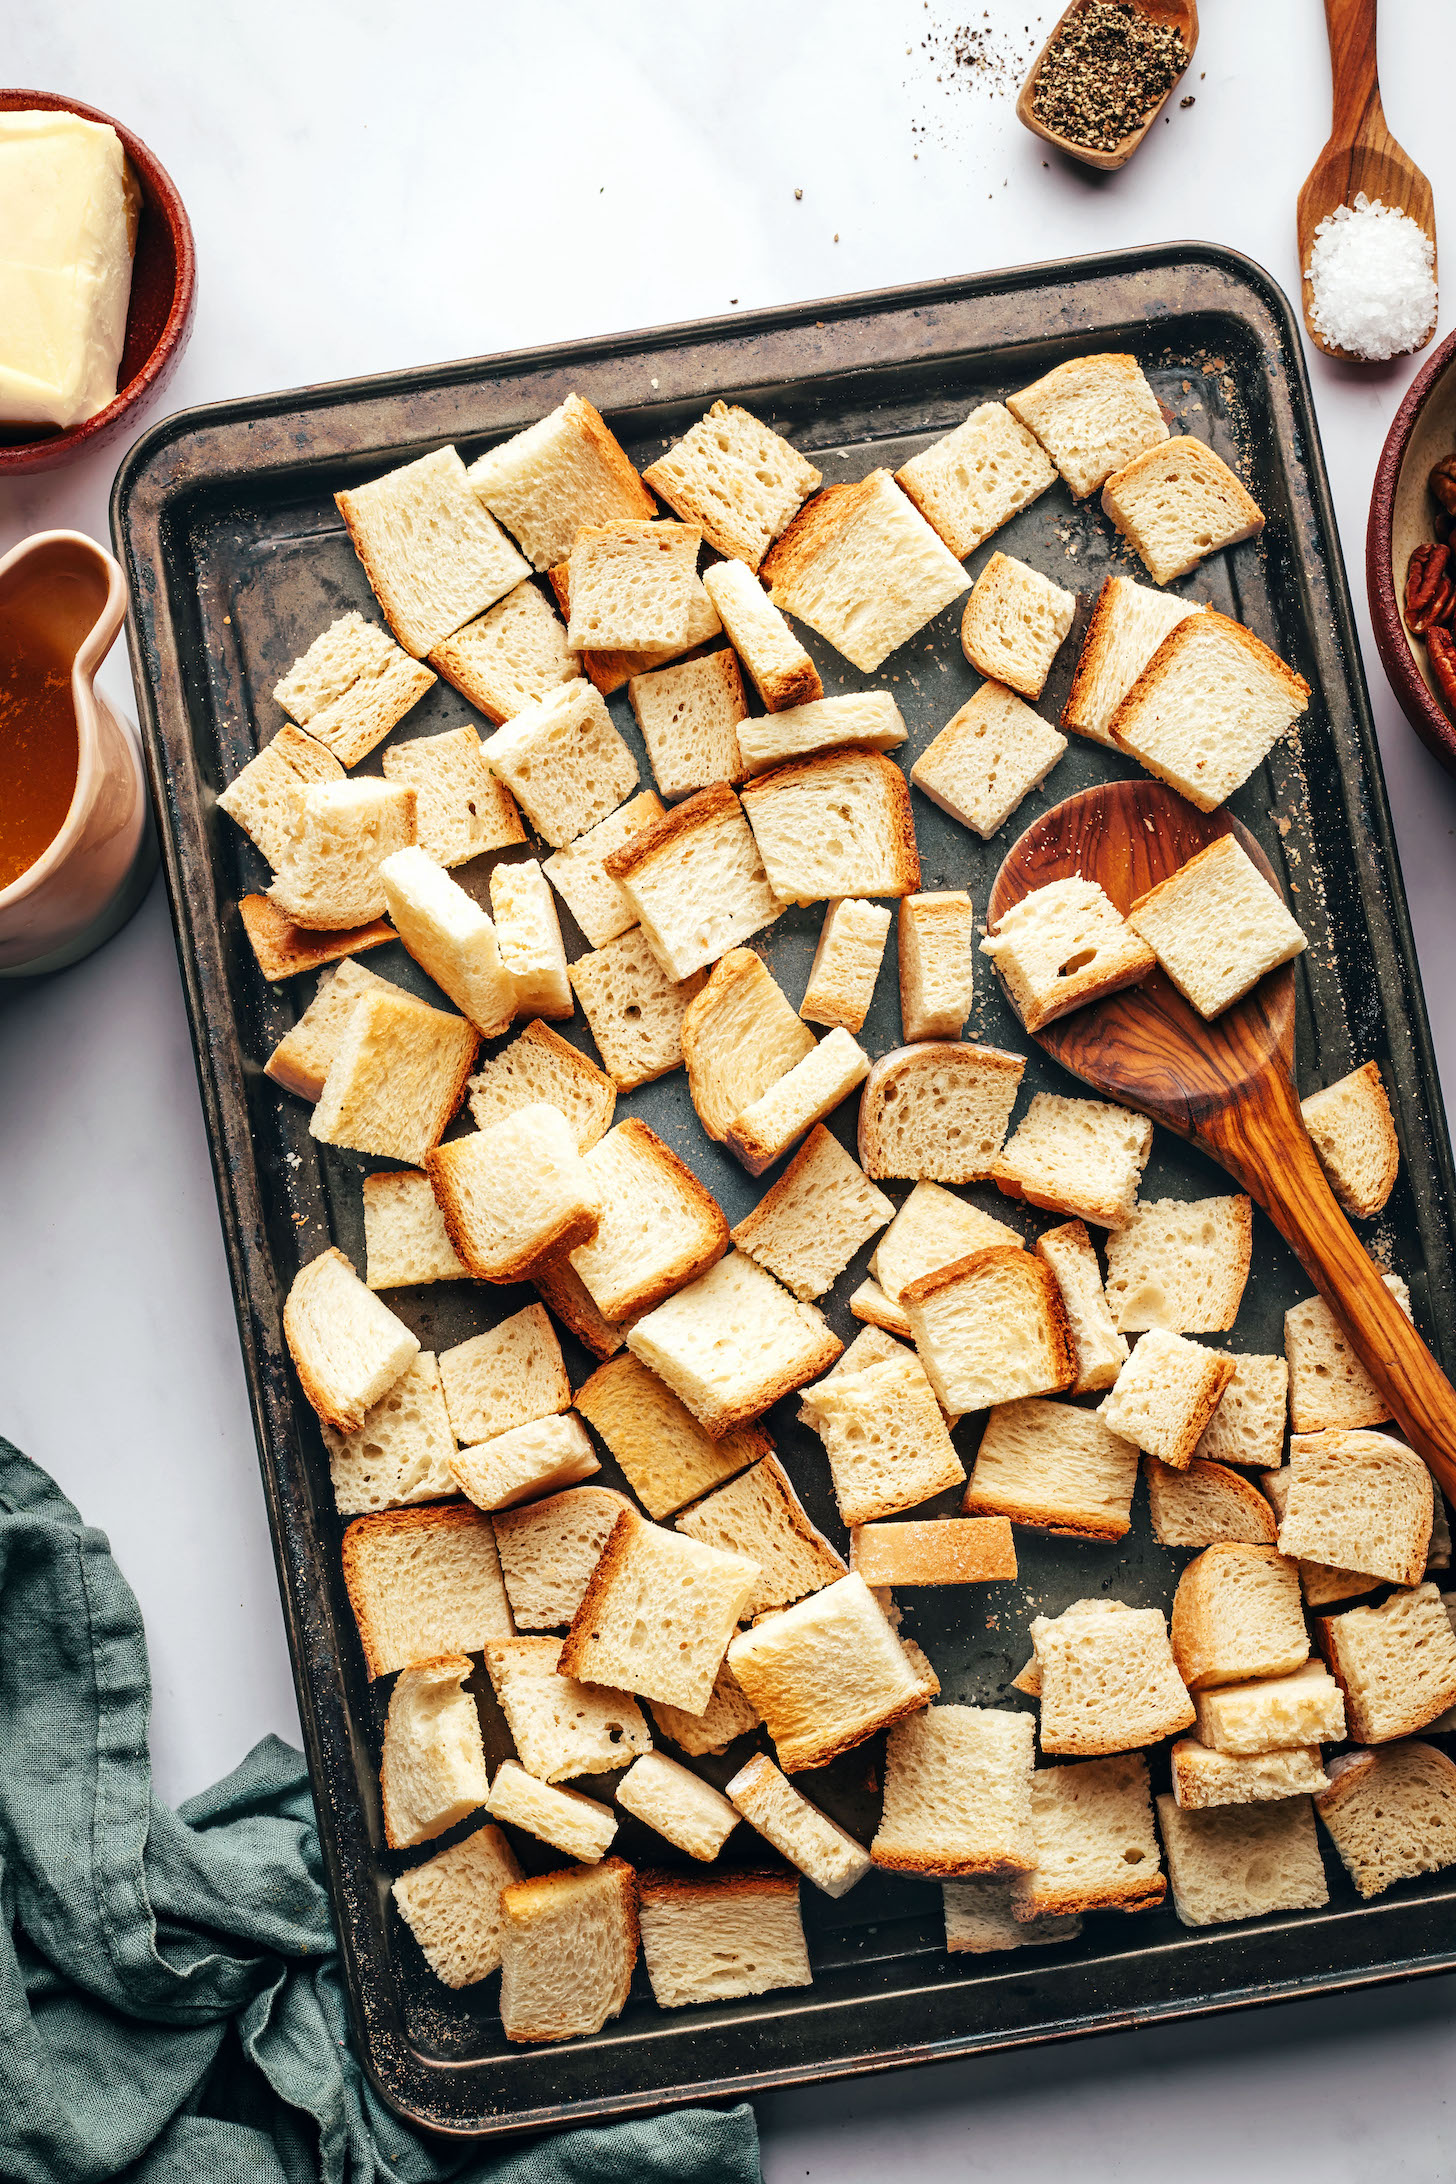 Cubed bread on a baking sheet